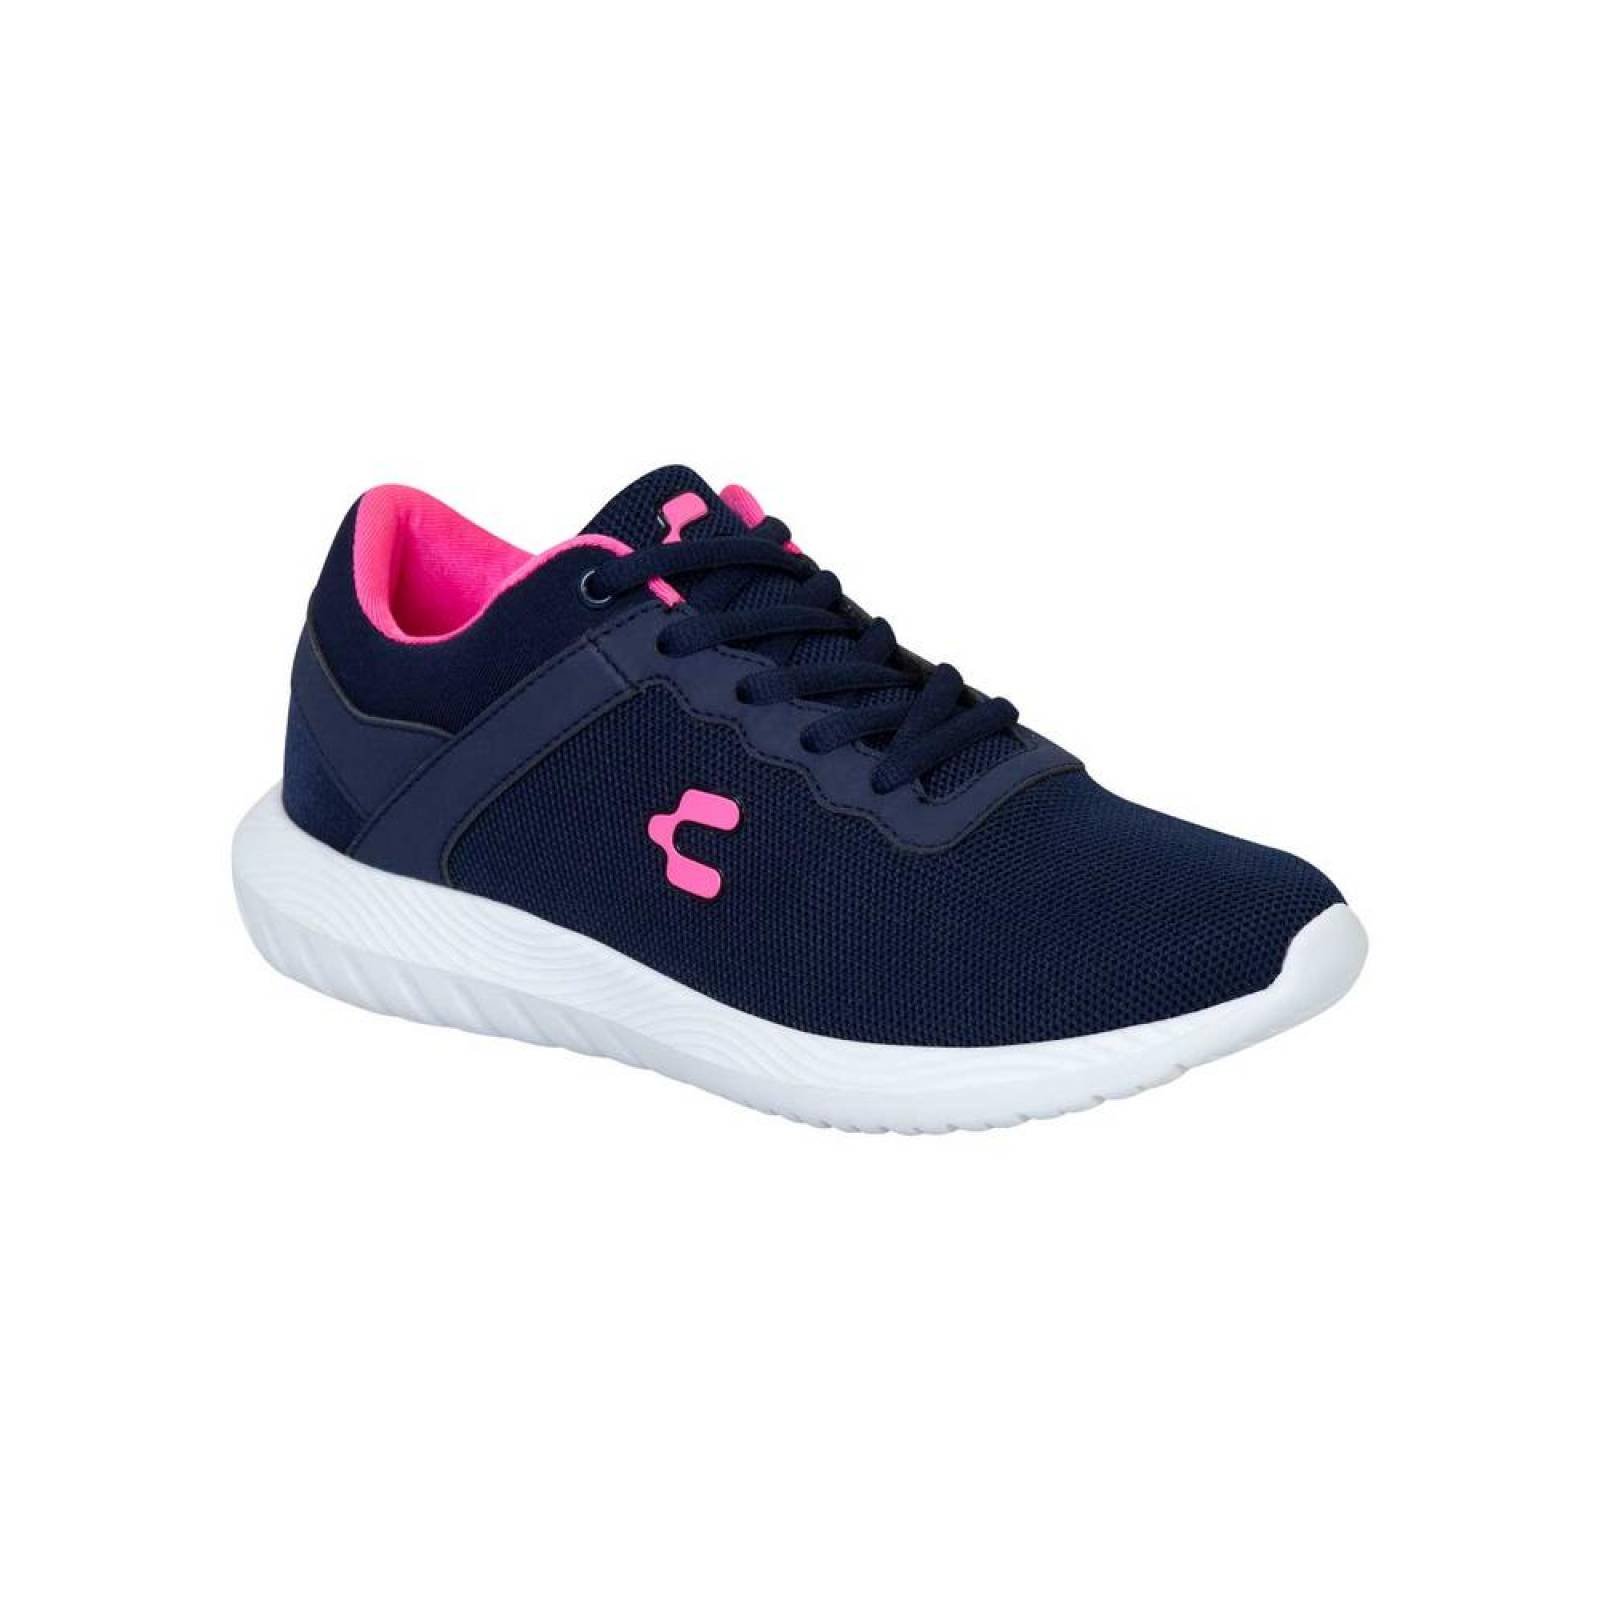 TENIS CHARLY MUJER AZUL TEXTIL 1049421002 